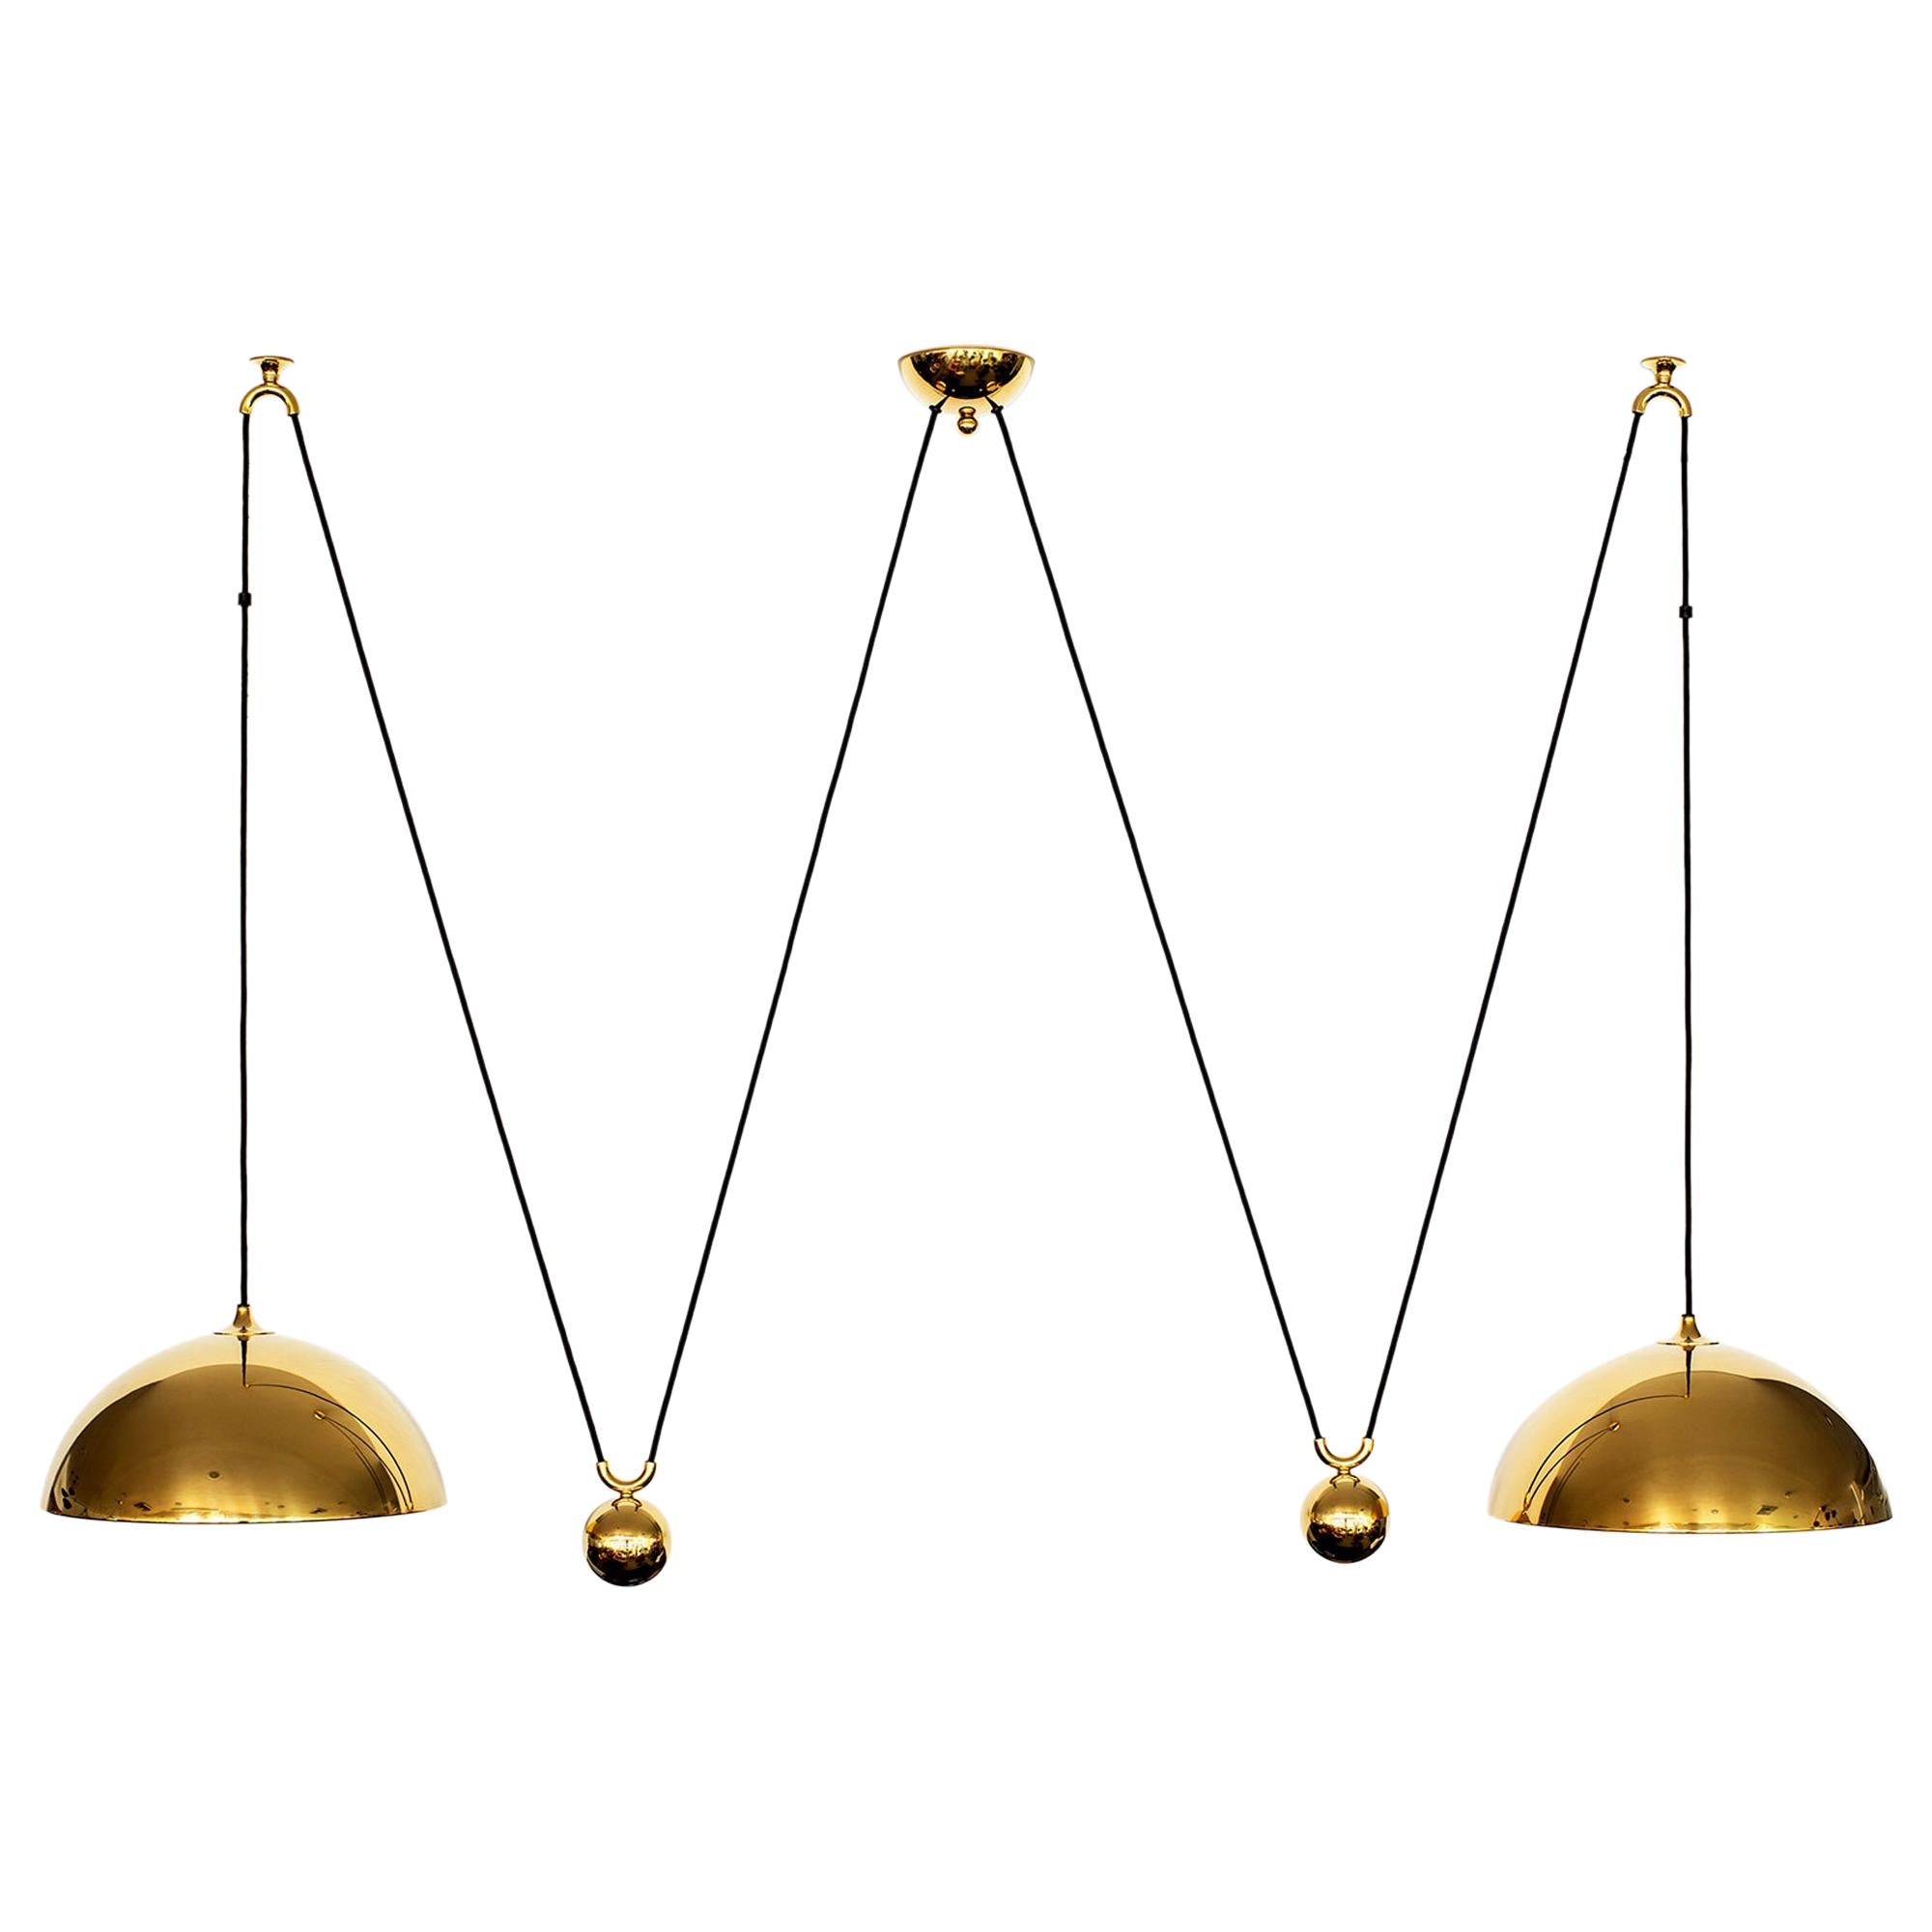 Florian Schulz Attributed Double Dome Counterbalance Pendant For Sale